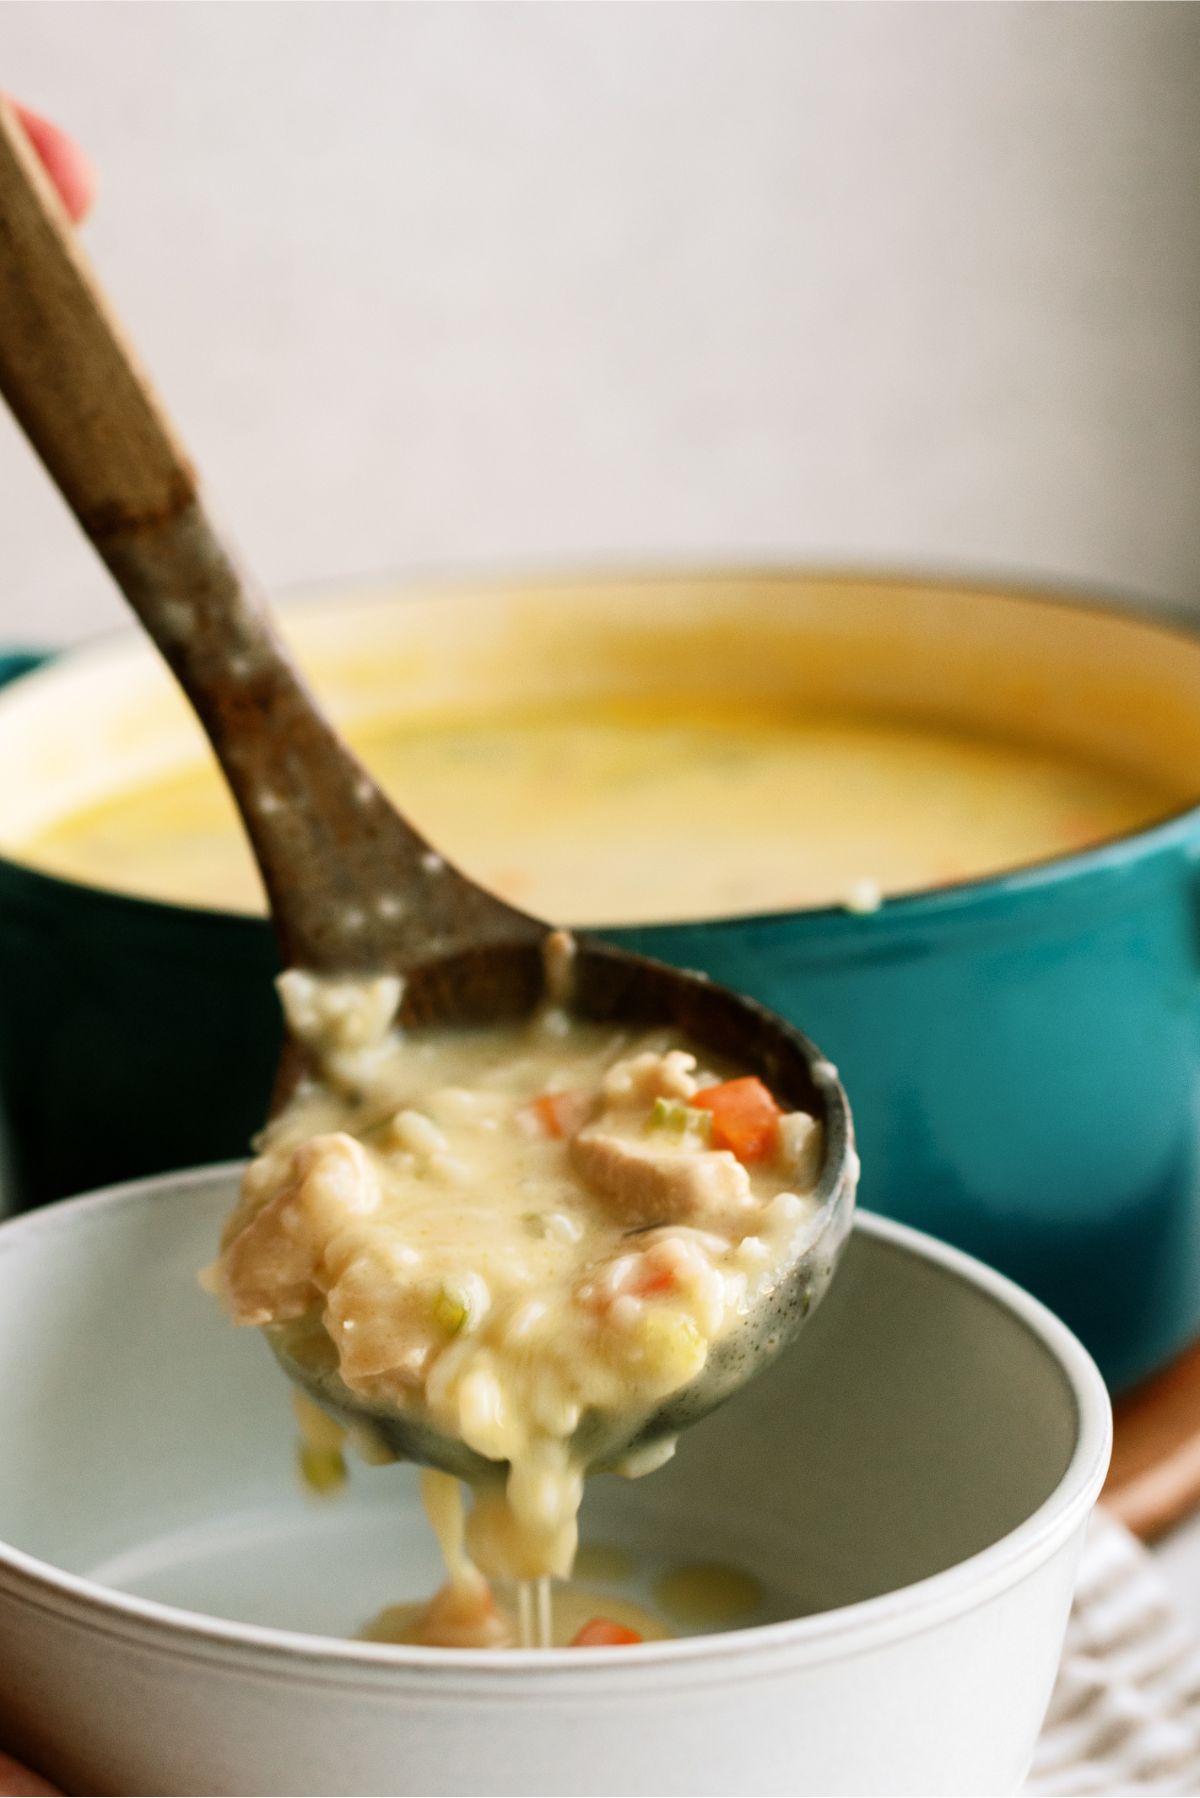 A ladle scooping a serving of Creamy Chicken and Wild Rice Soup into a bowl